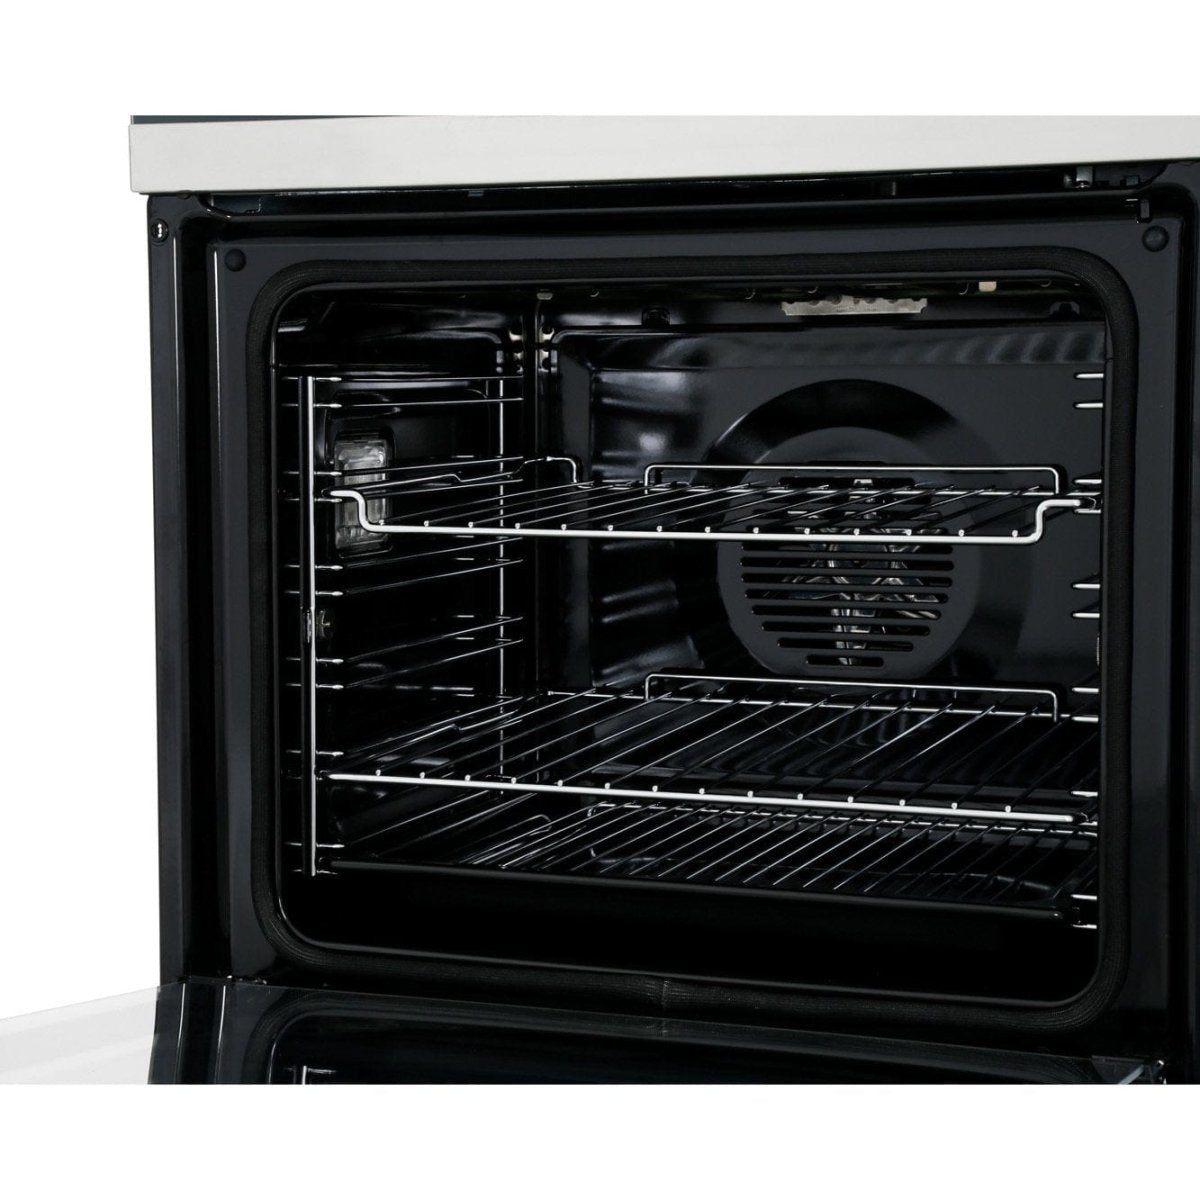 Fisher & Paykel Series 5 OB60SC7CEPX1 Single Built In Electric Oven - Atlantic Electrics